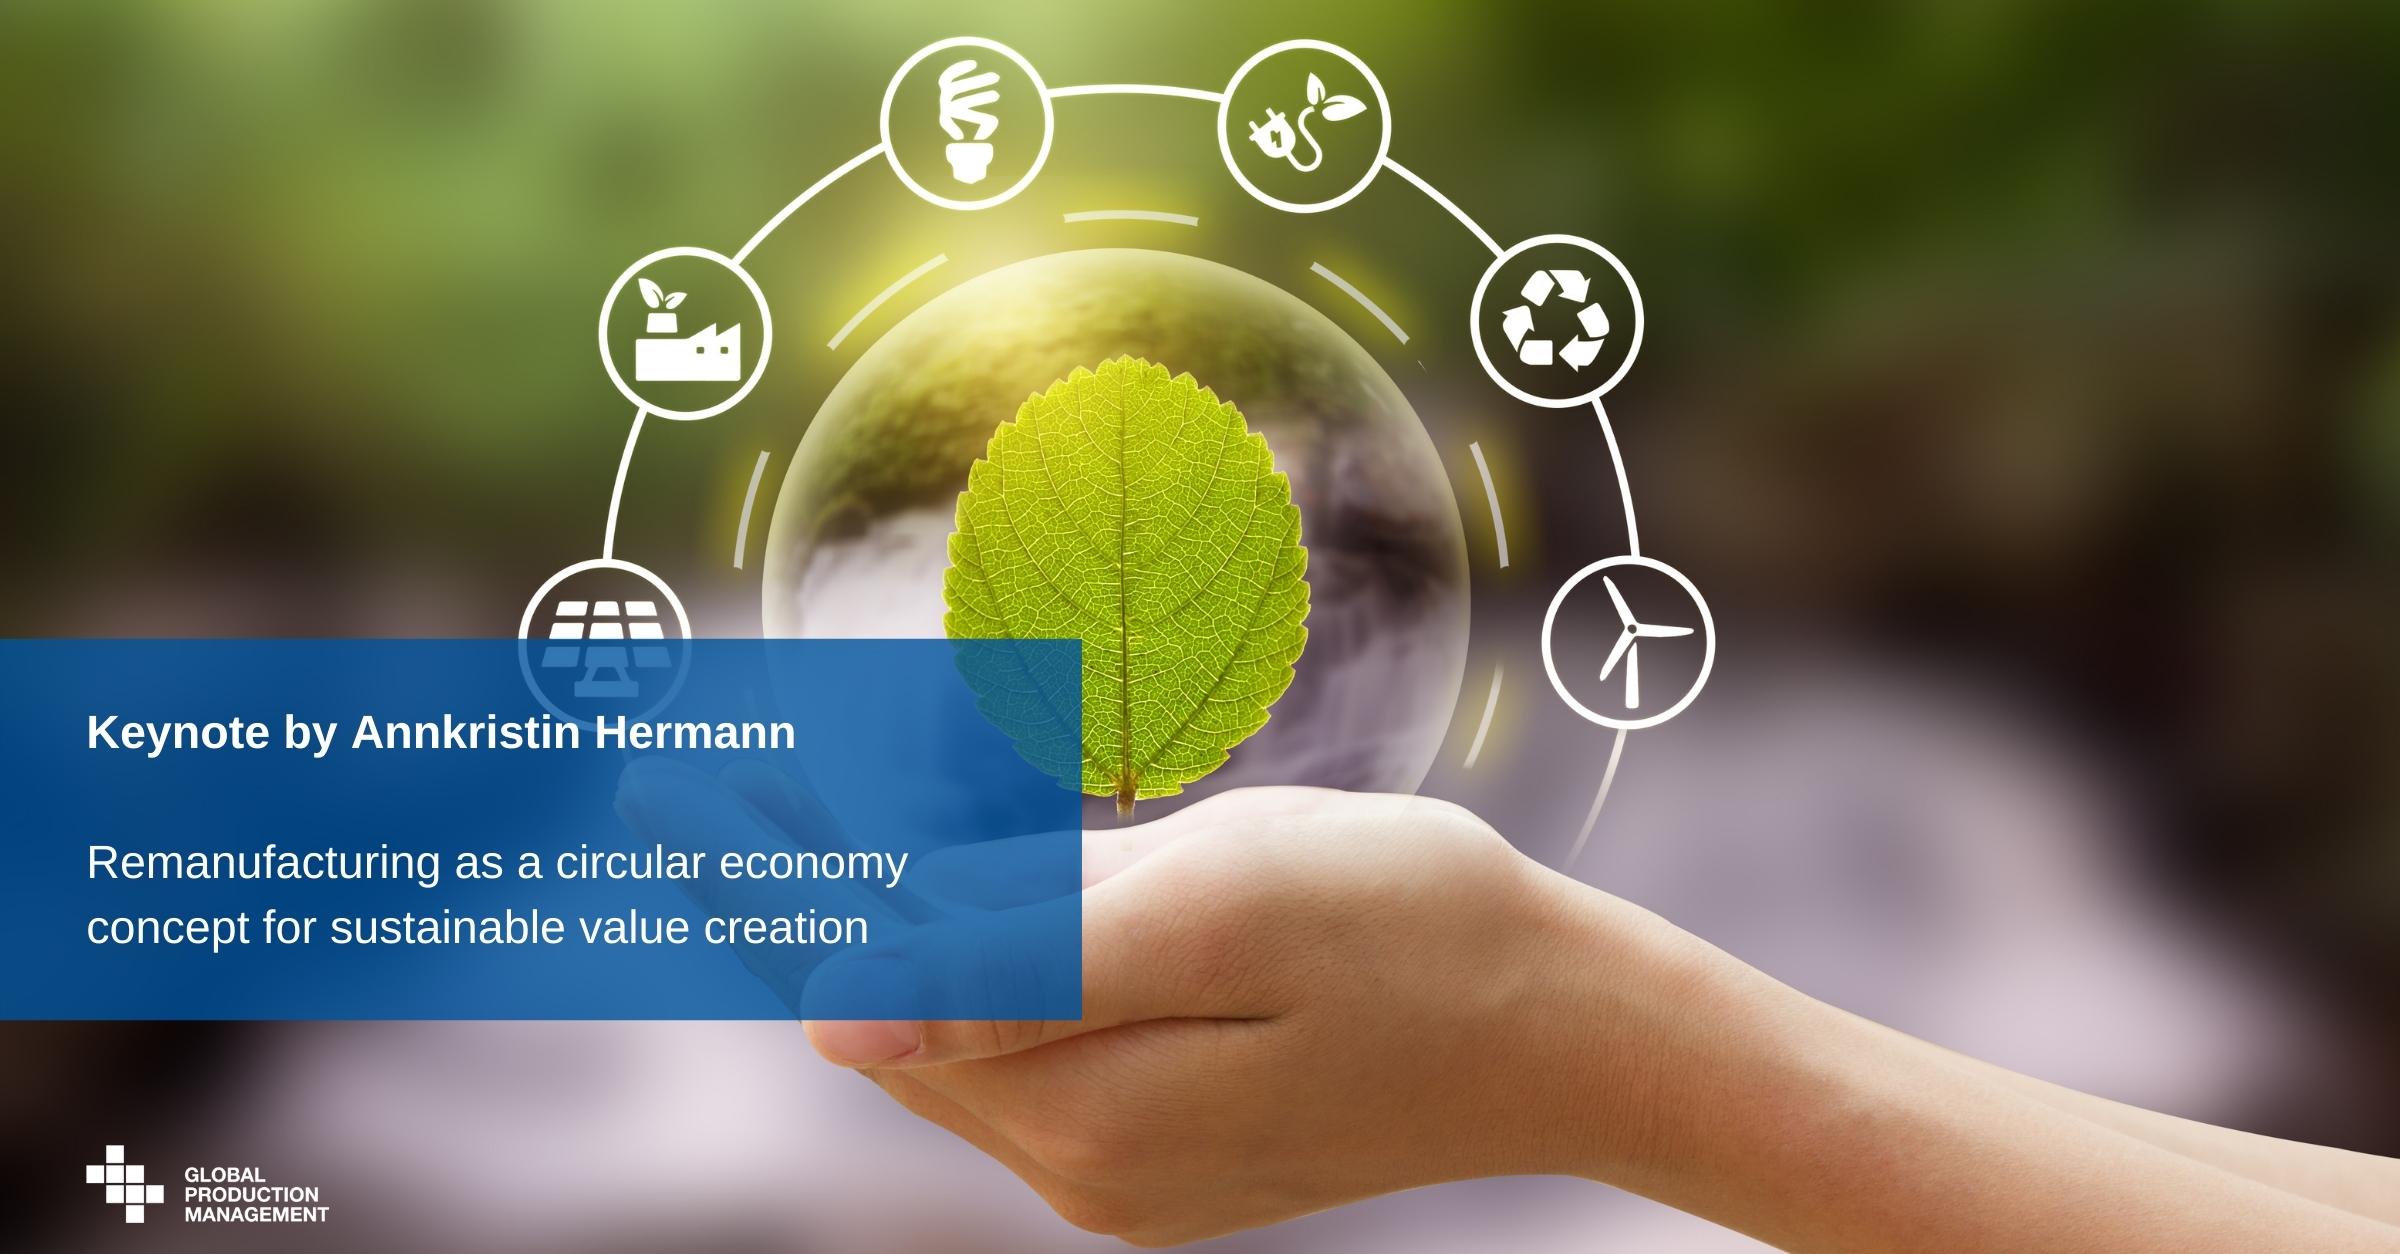 Keynote-by-Annkristin-Hermann-Remanufacturing-as-a-circular-economy-concept-for-sustainable-value-creation Sustainability in the production system  